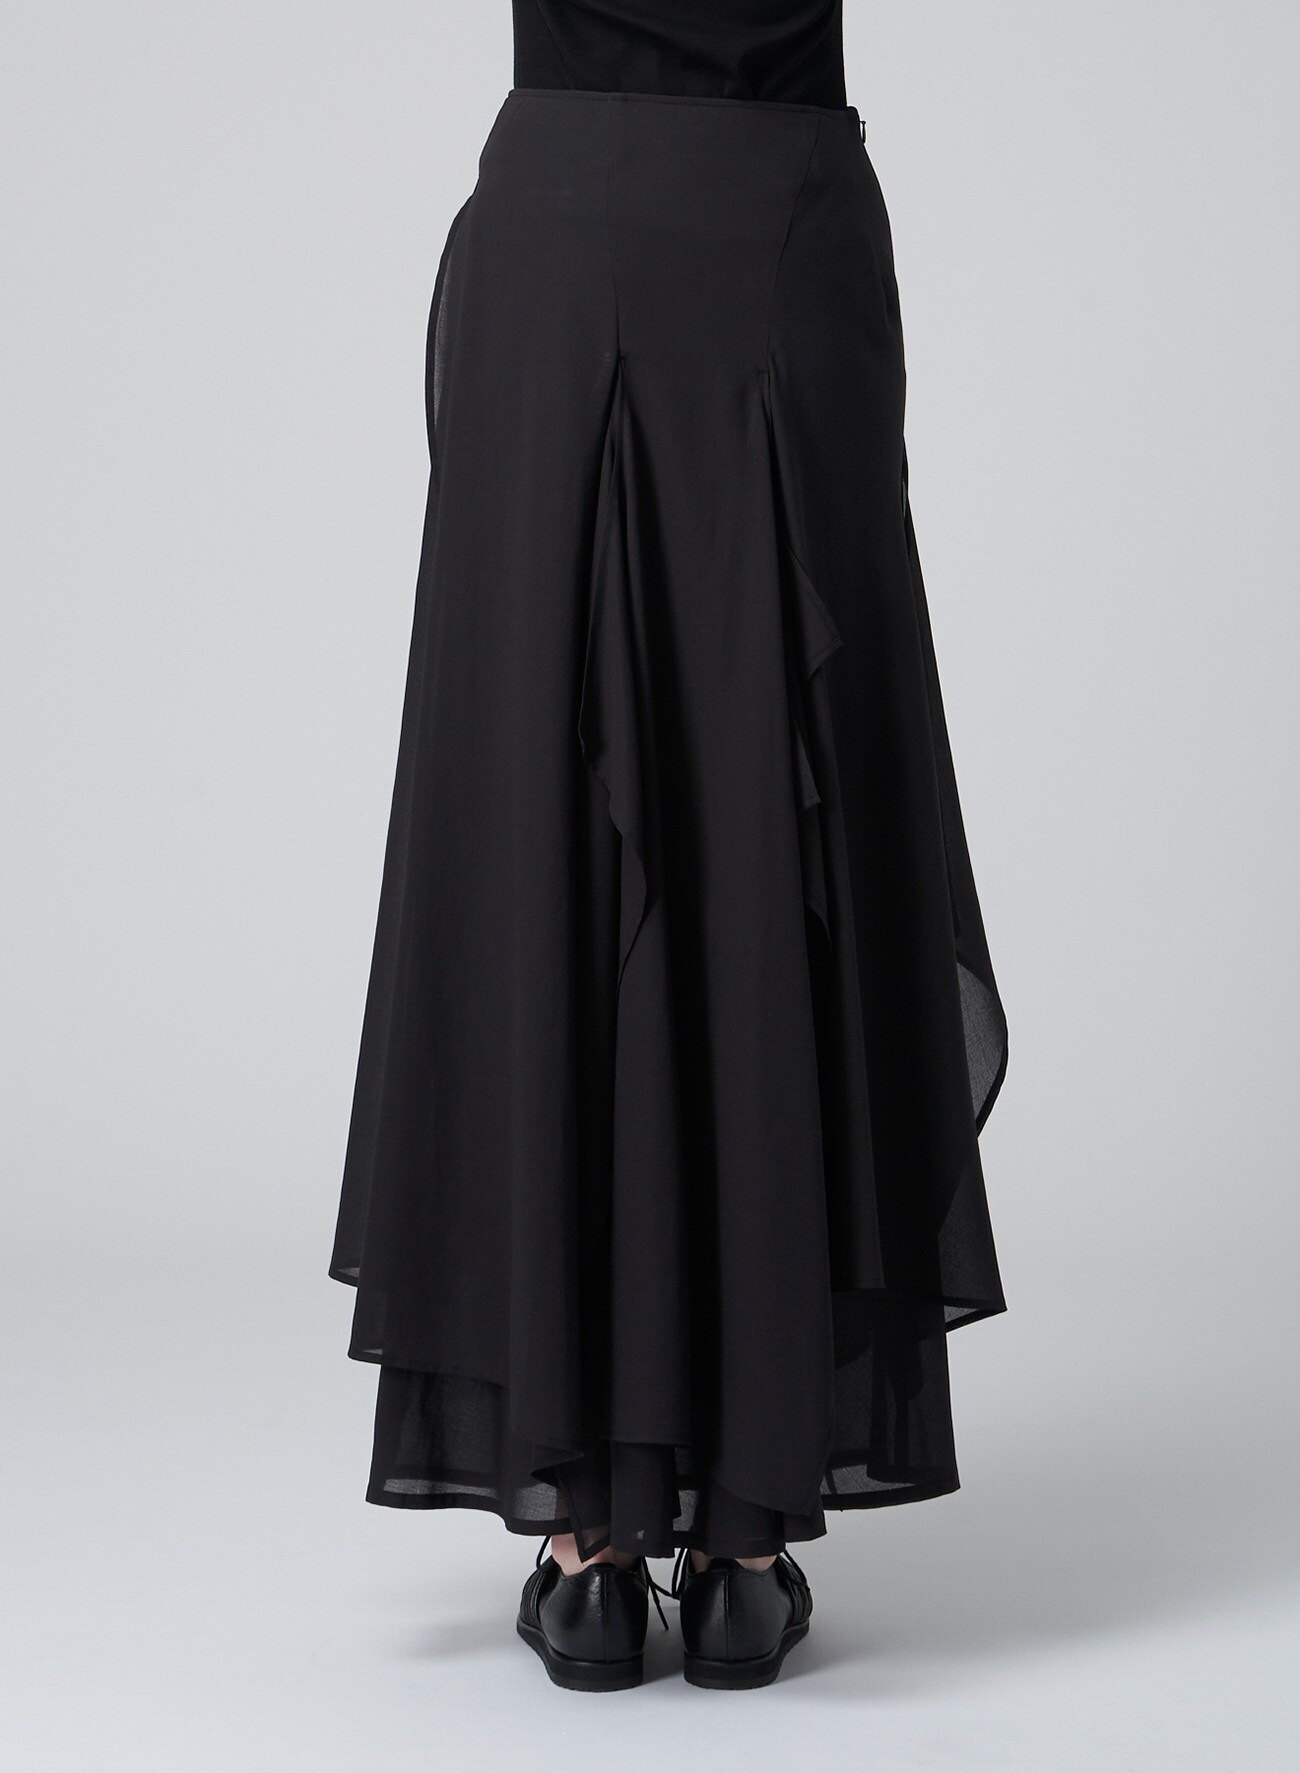 100/2 GEORGETTE DOUBLE LAYERED FLARED SKIRT